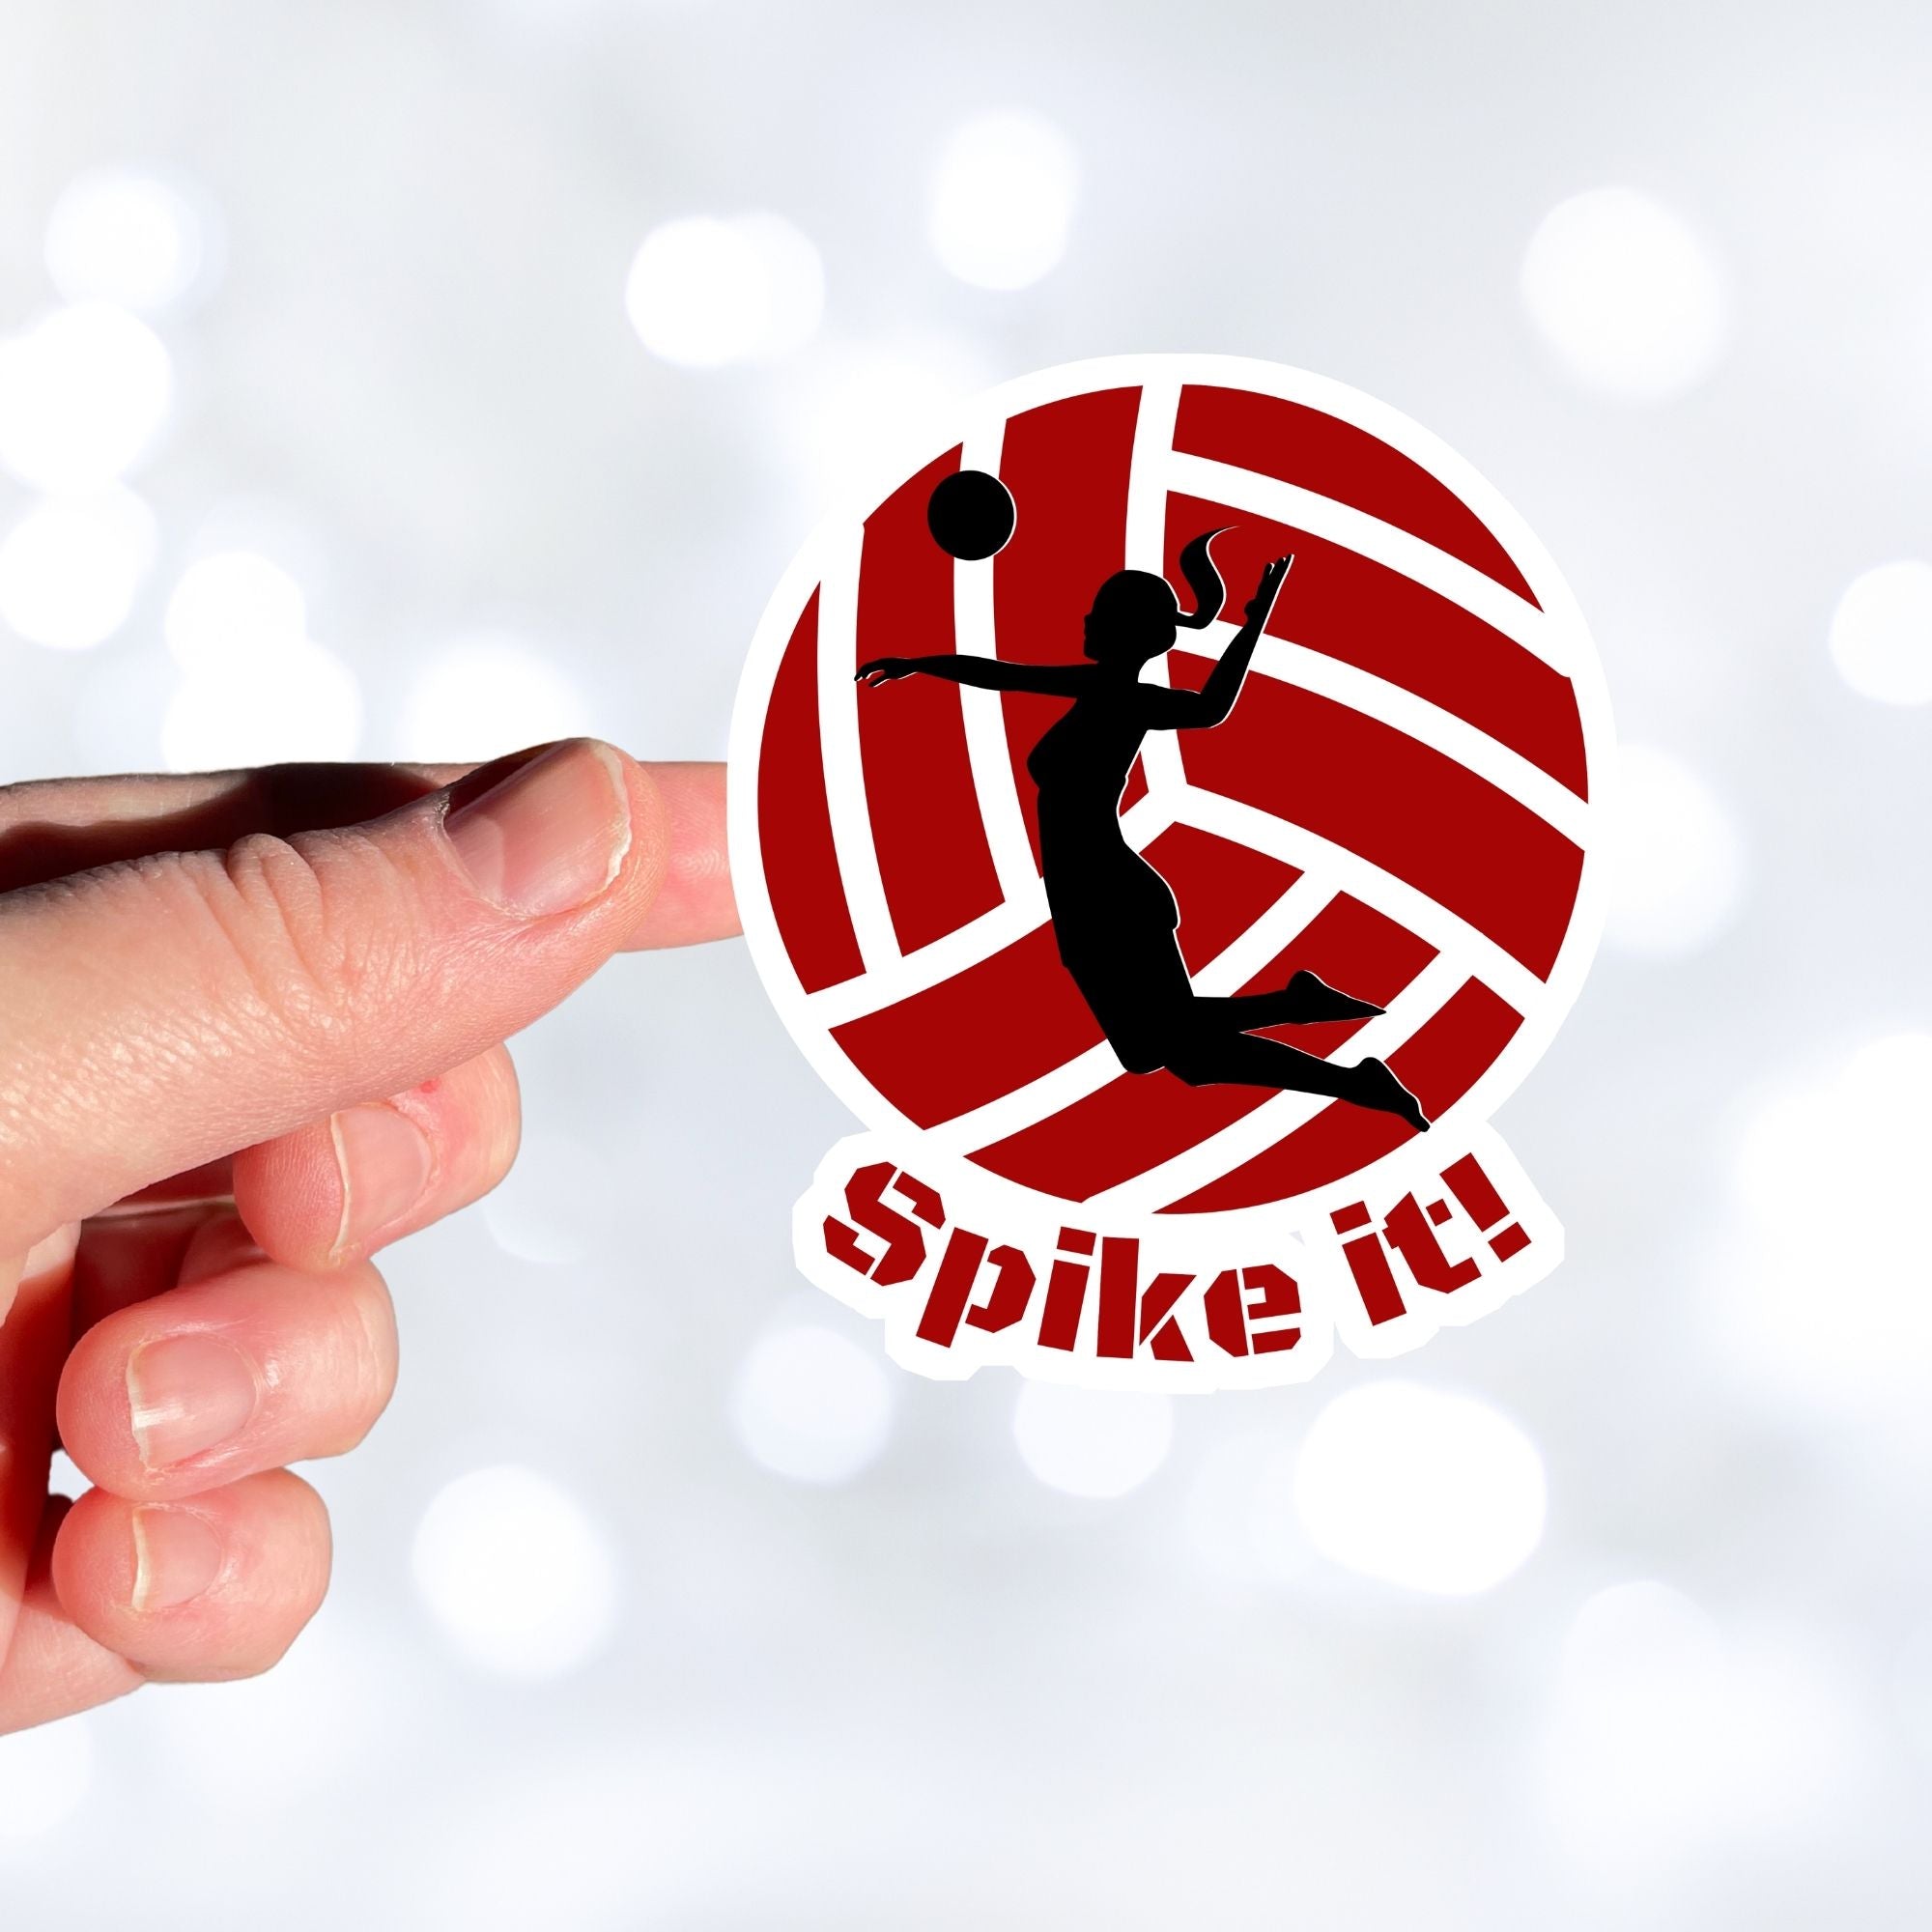 Show your love of volleyball with this individual die-cut sticker! This sticker shows the silhouette of a player with a ponytail about to spike the ball, on a maroon and white volleyball background, with the words "Spike it!" below. This image shows a hand holding the volleyball sticker.